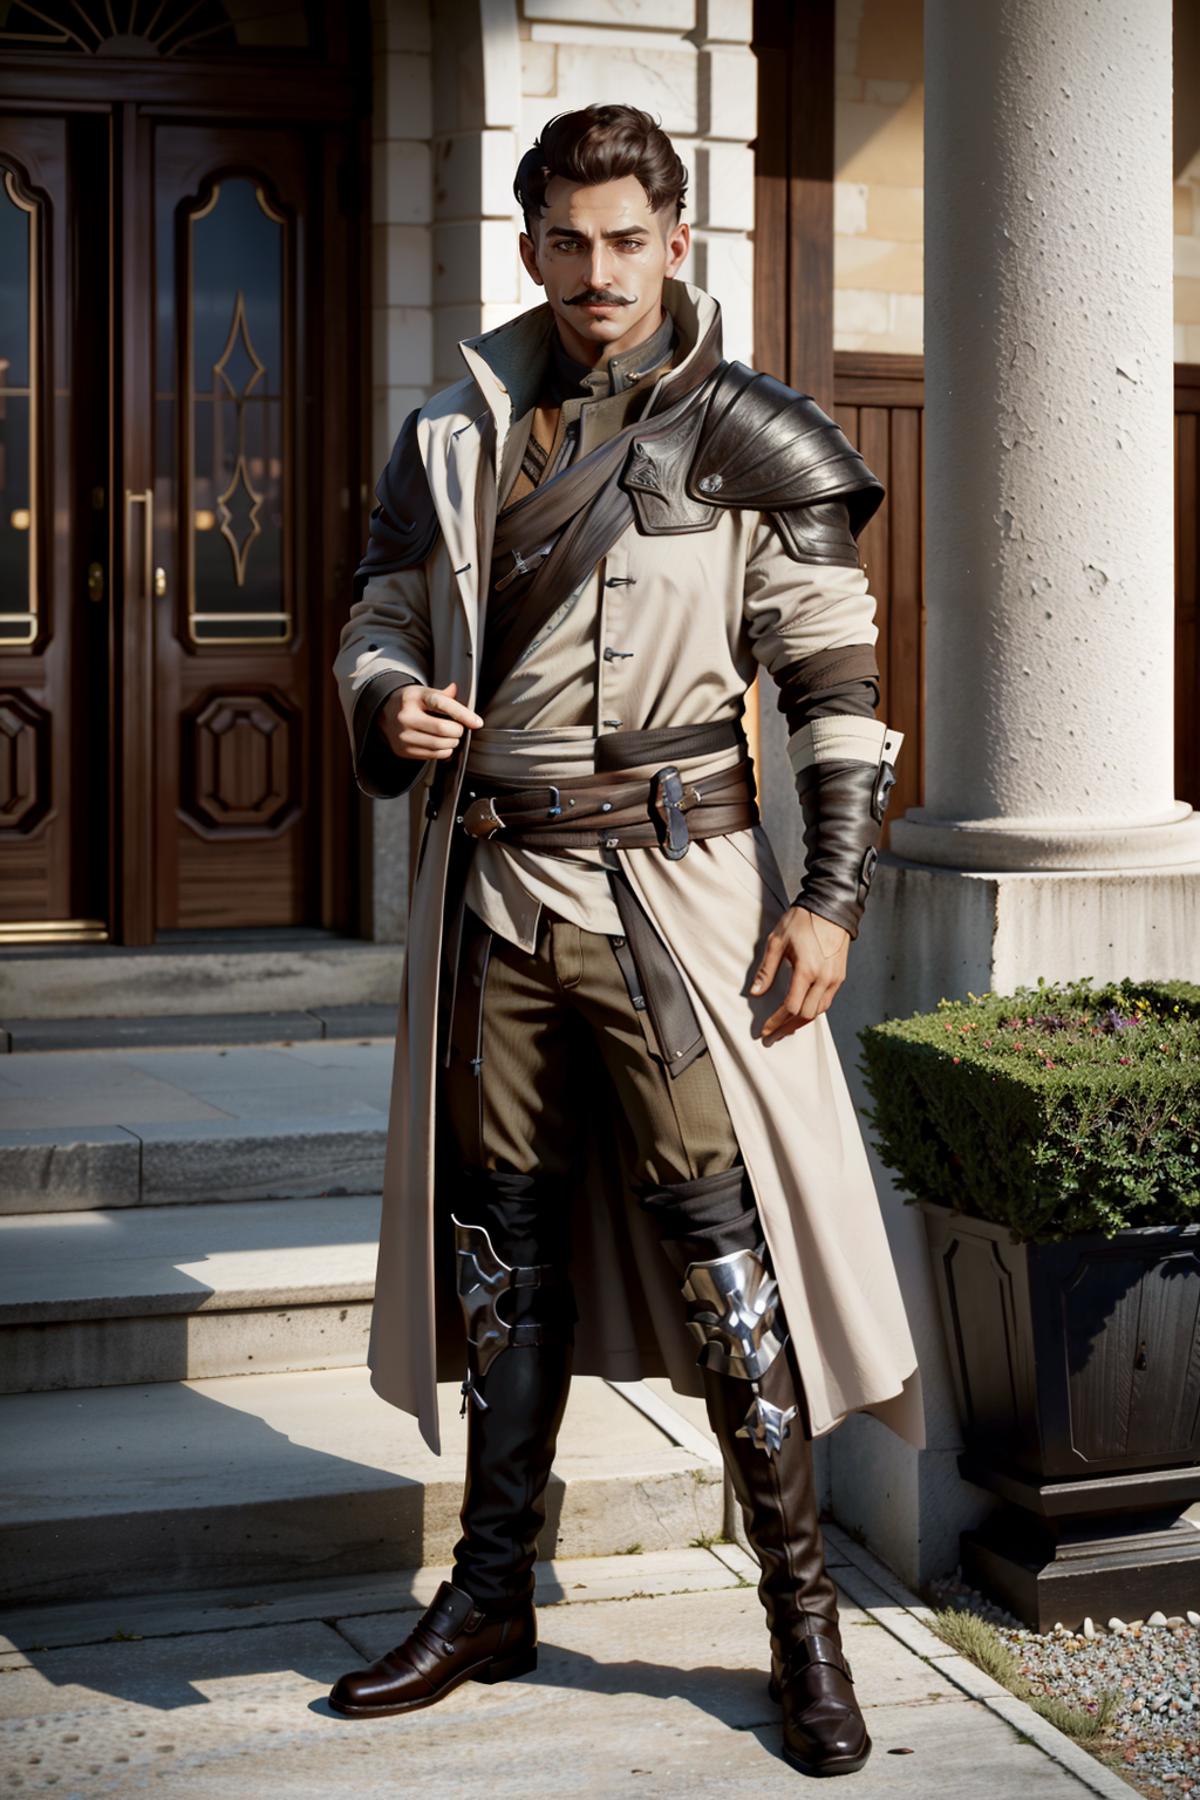 Dorian from Dragon Age: Inquisition image by BloodRedKittie